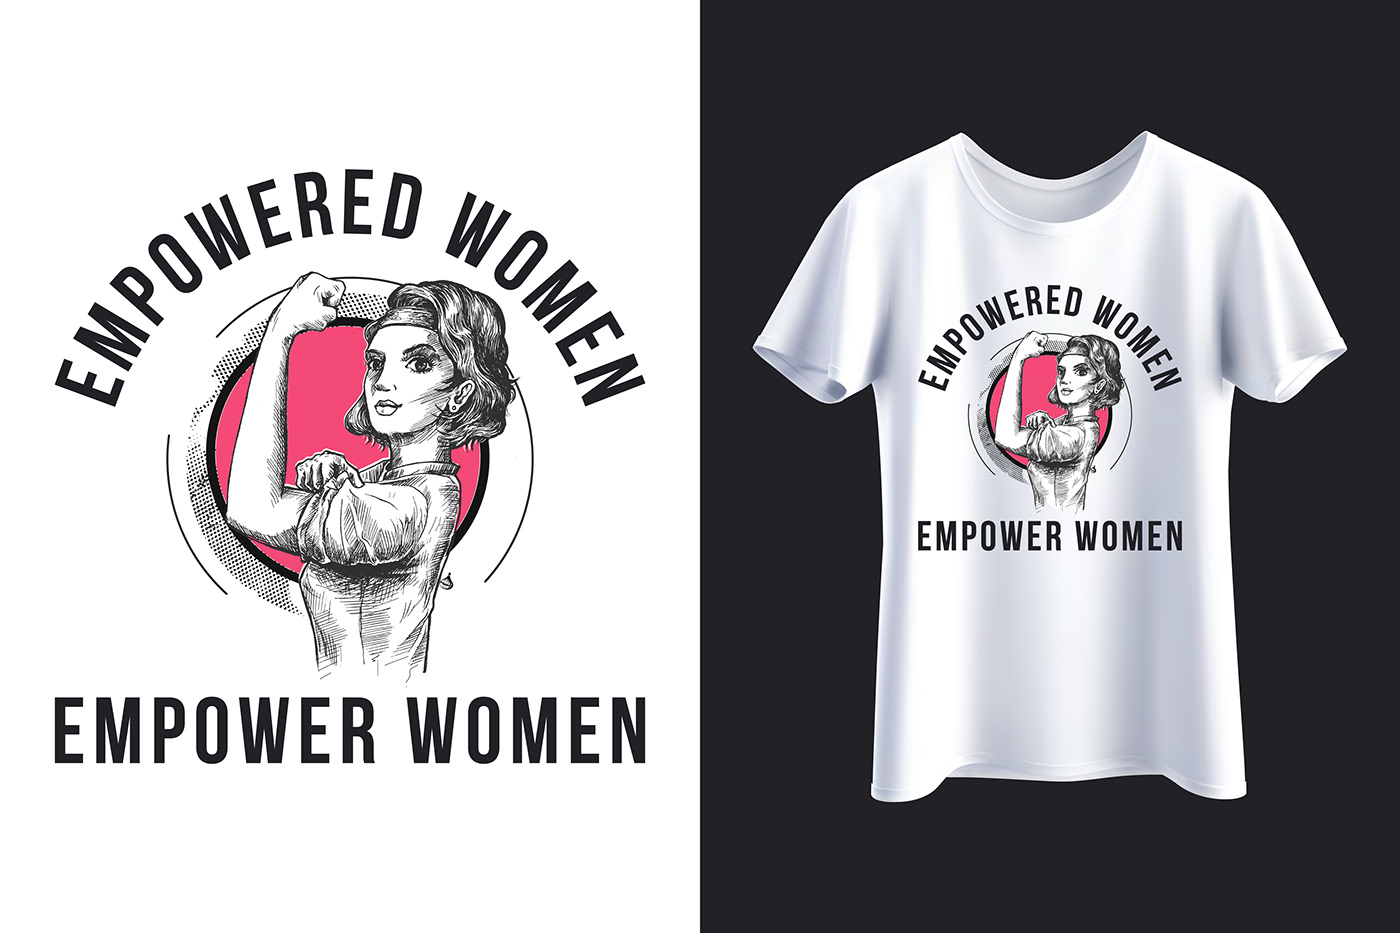 empowerment women strength unity support Solidarity inspiration motivation confidence power